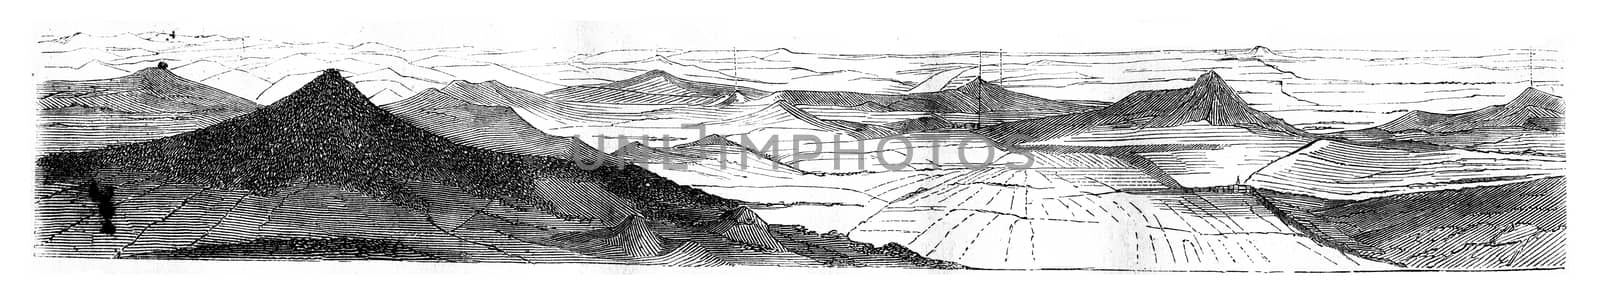 View of the east side, vintage engraving. by Morphart